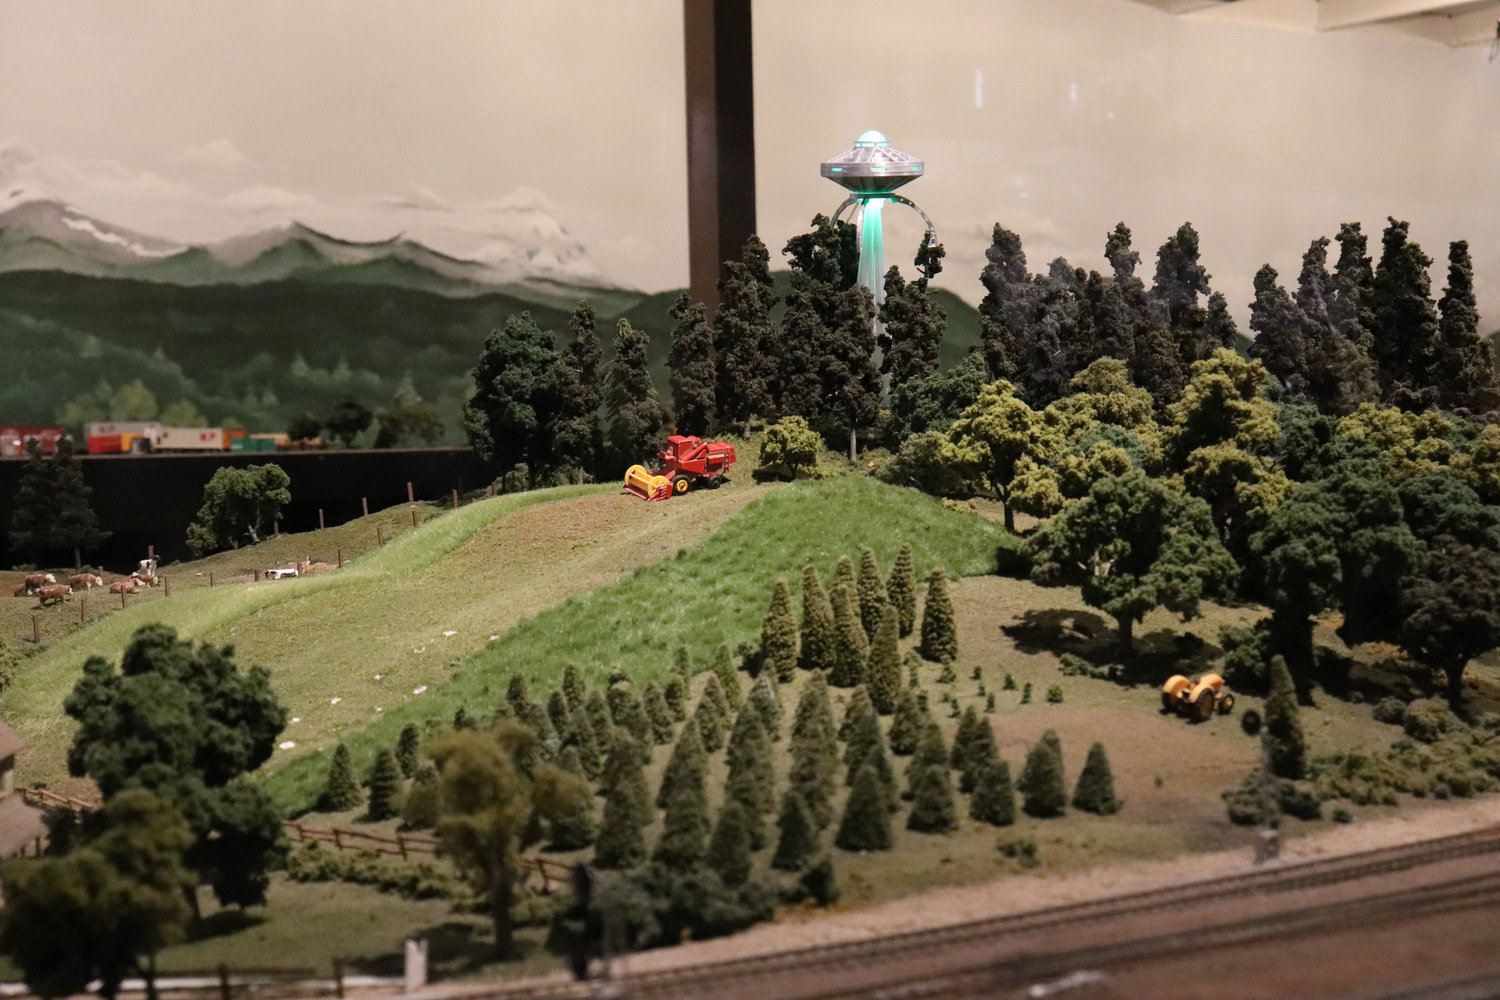 UFOs descended upon the Lewis County Historical Museum’s model train exhibit during the Chehalis Flying Saucer Party on Saturday.